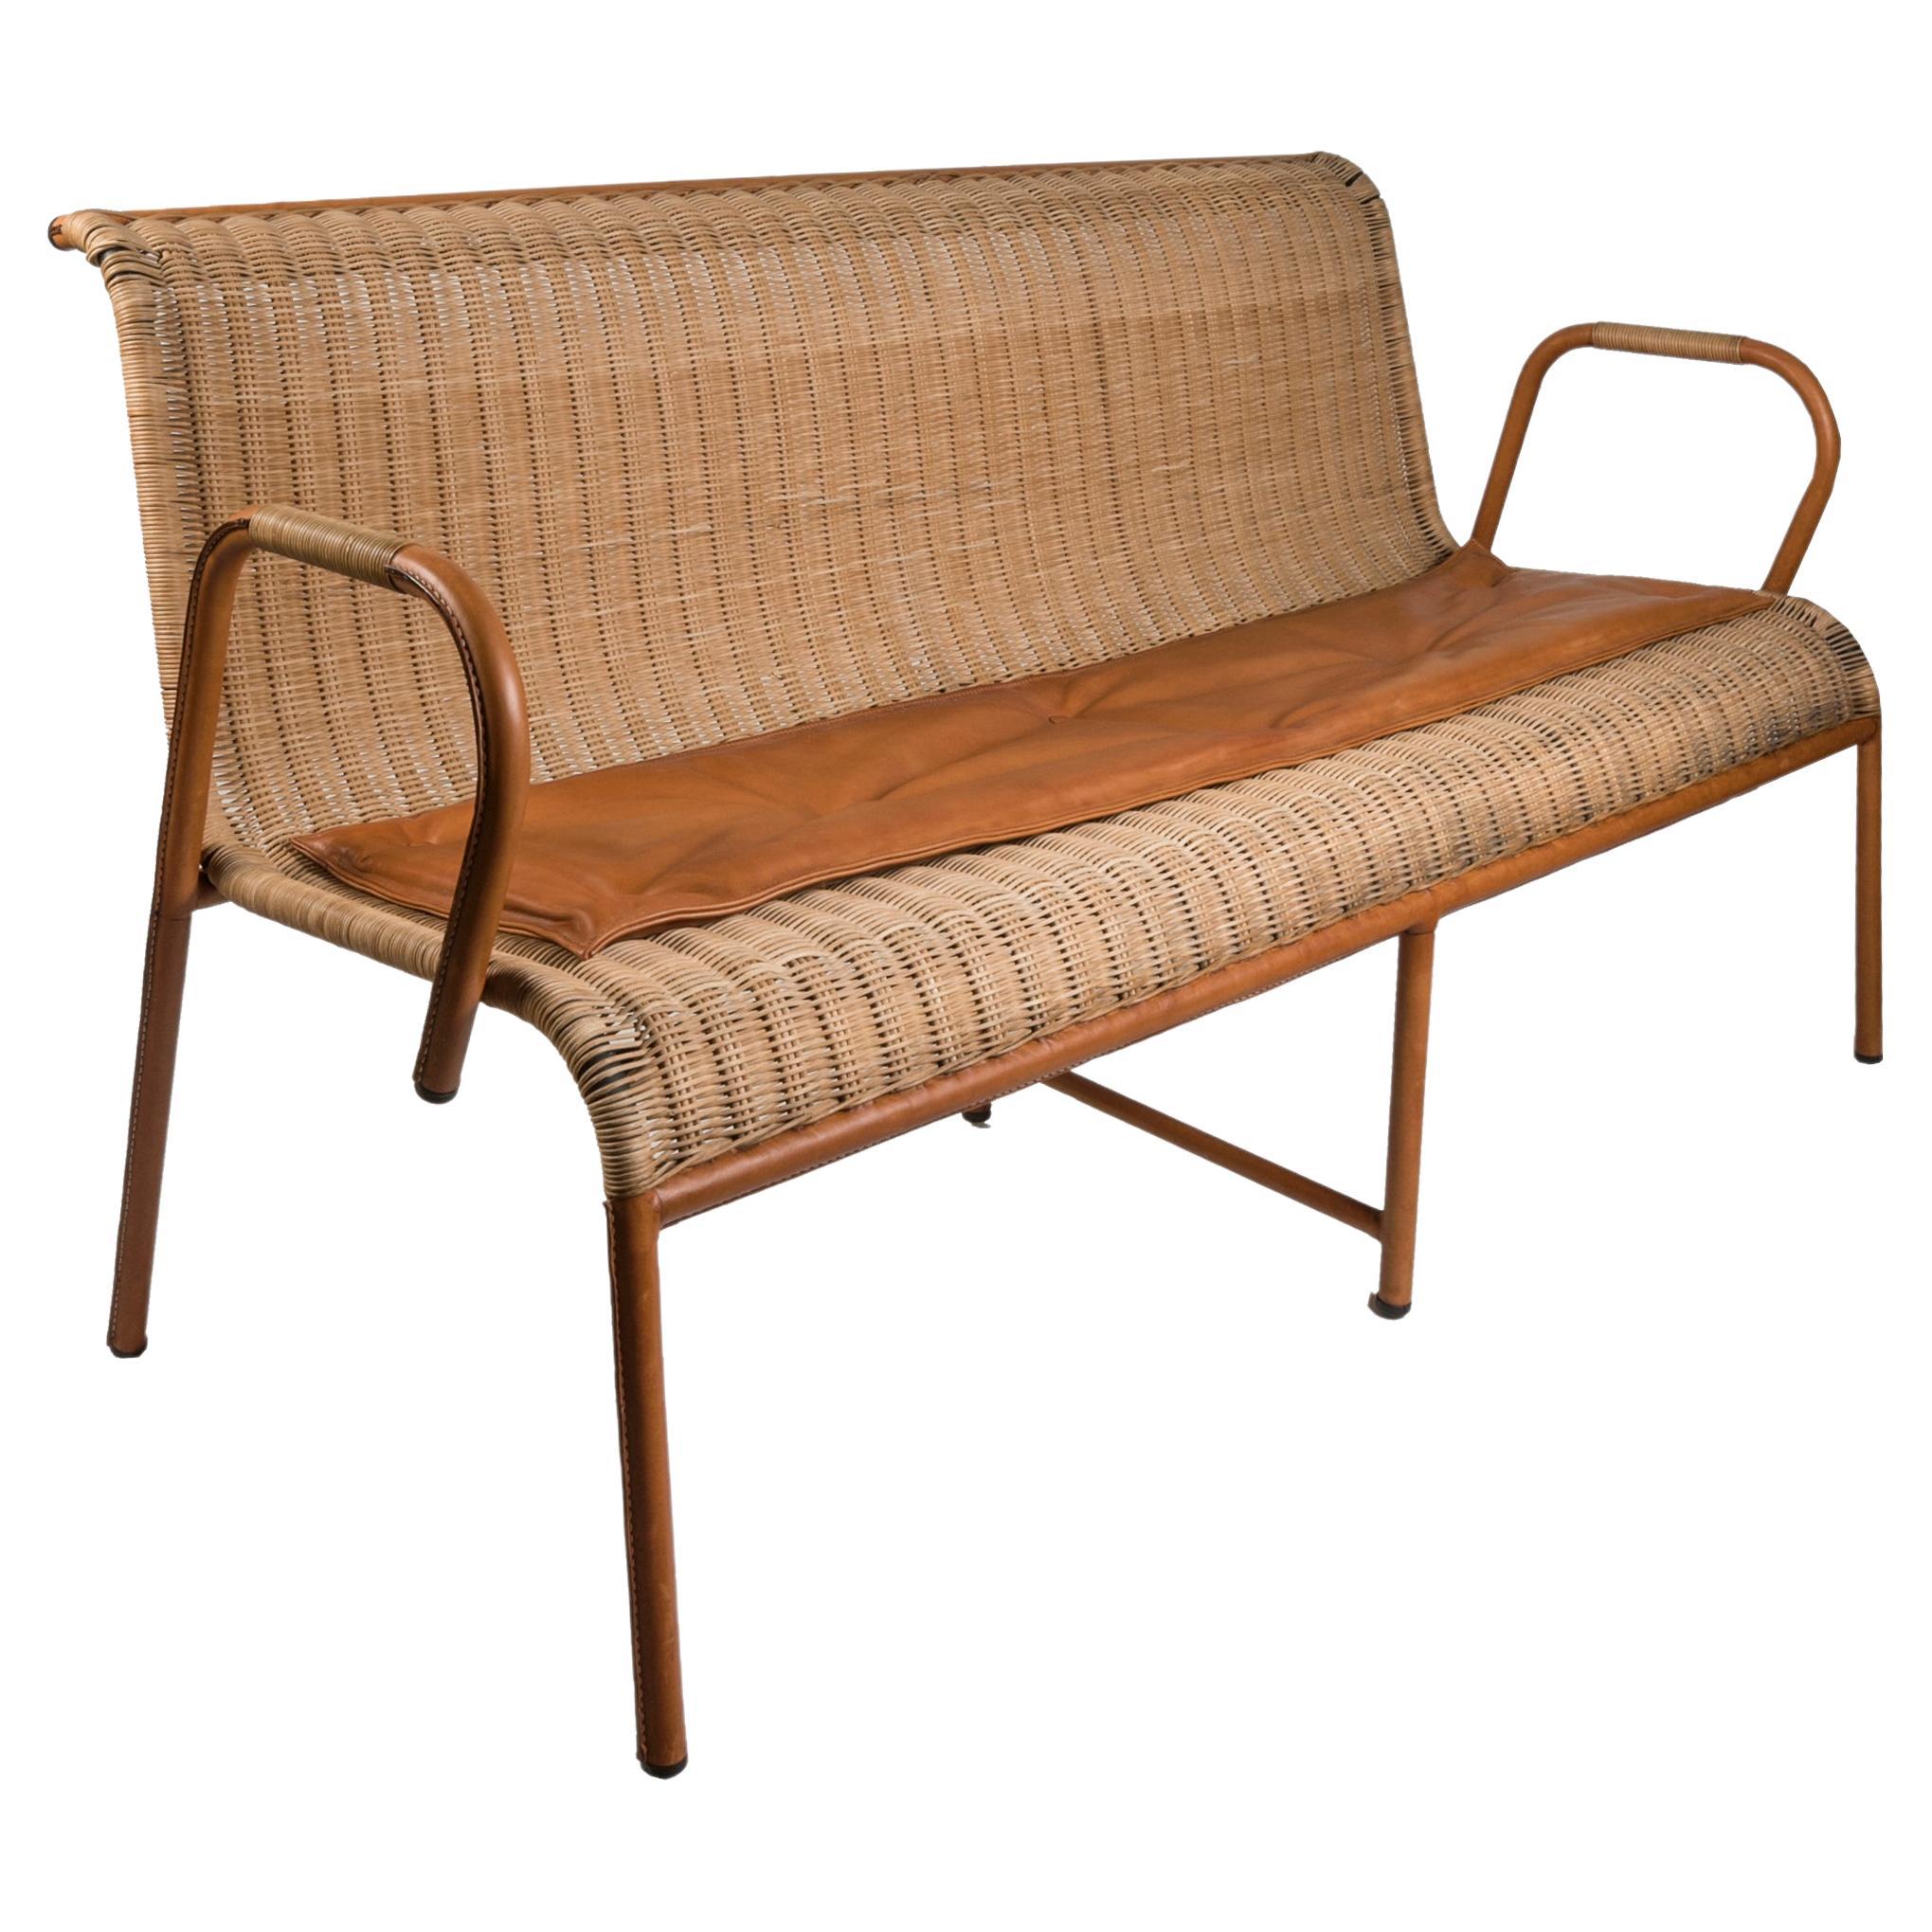 1950's Rattan and Stitched Leather Sofa by Jacques Adnet For Sale